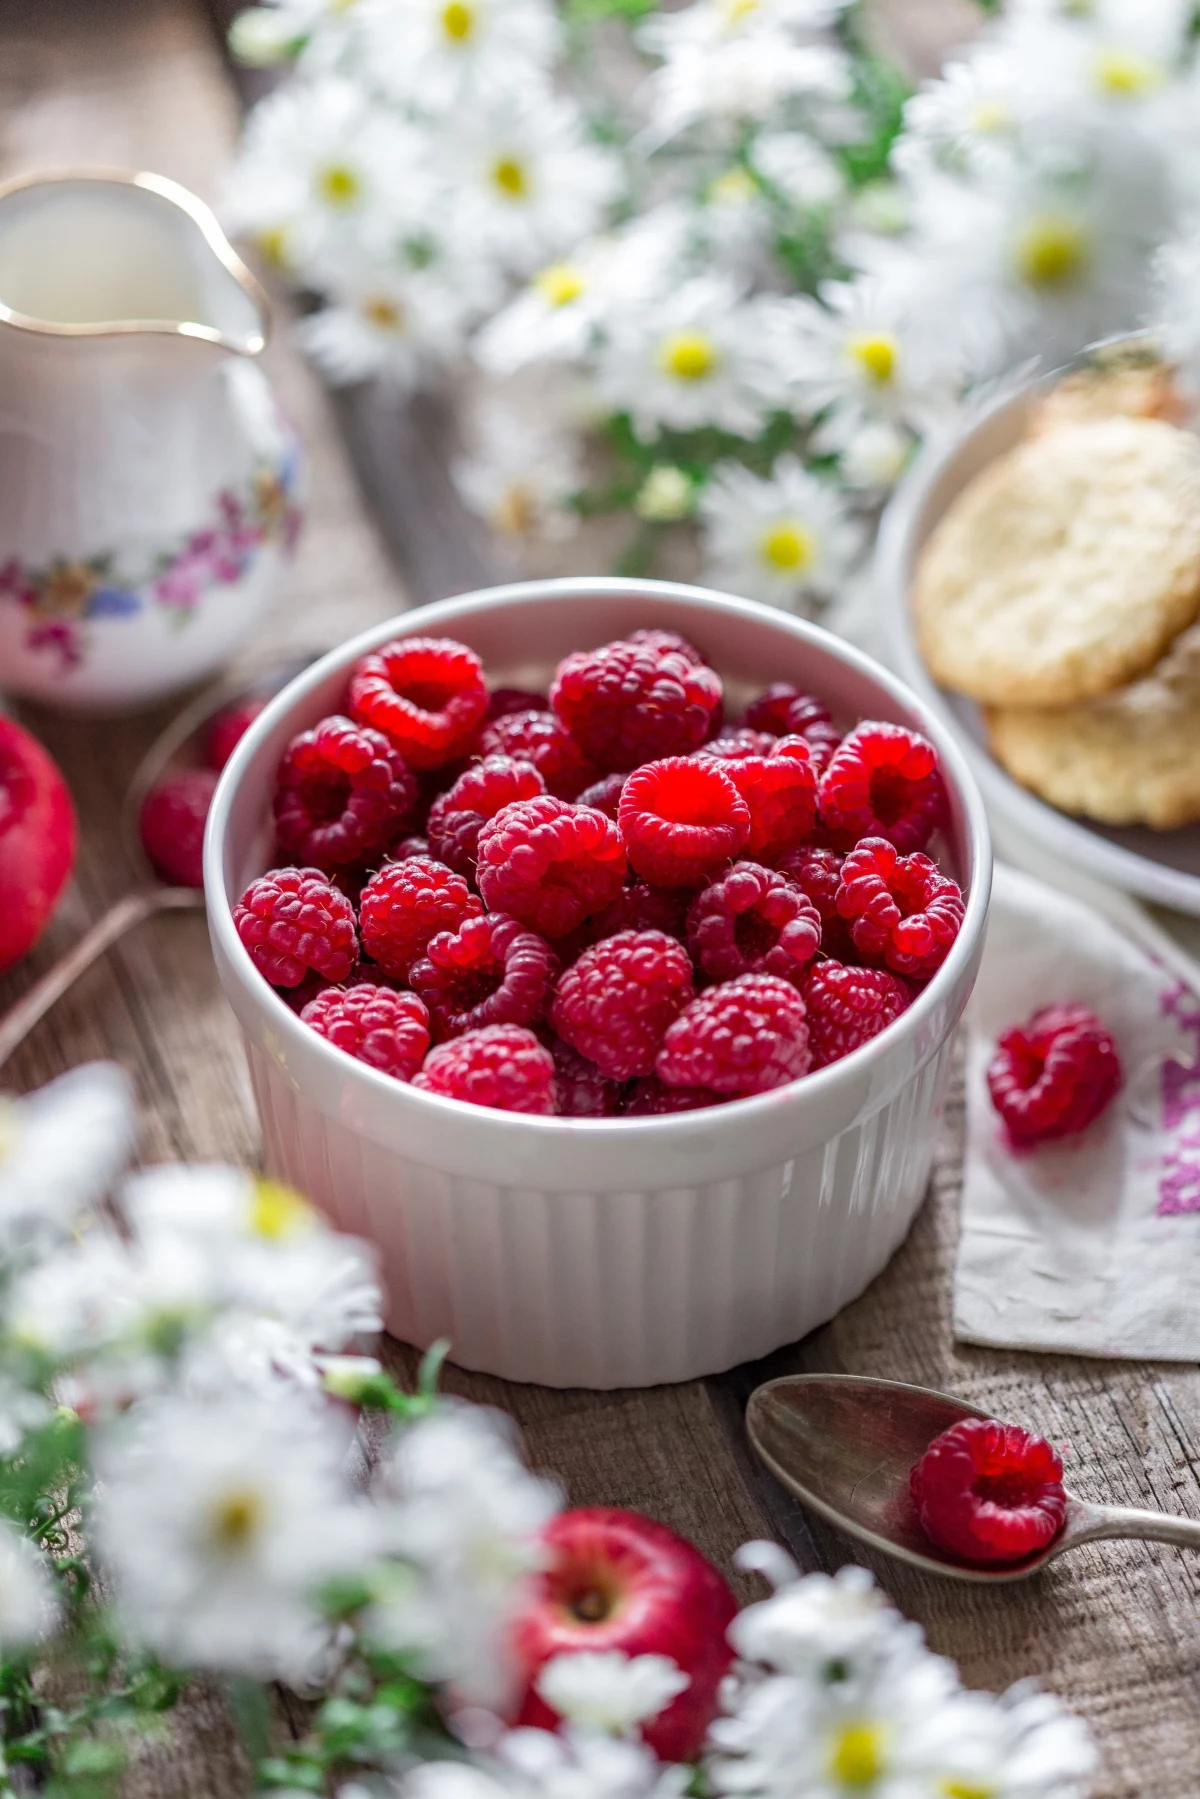 what health benefits does raspberries have